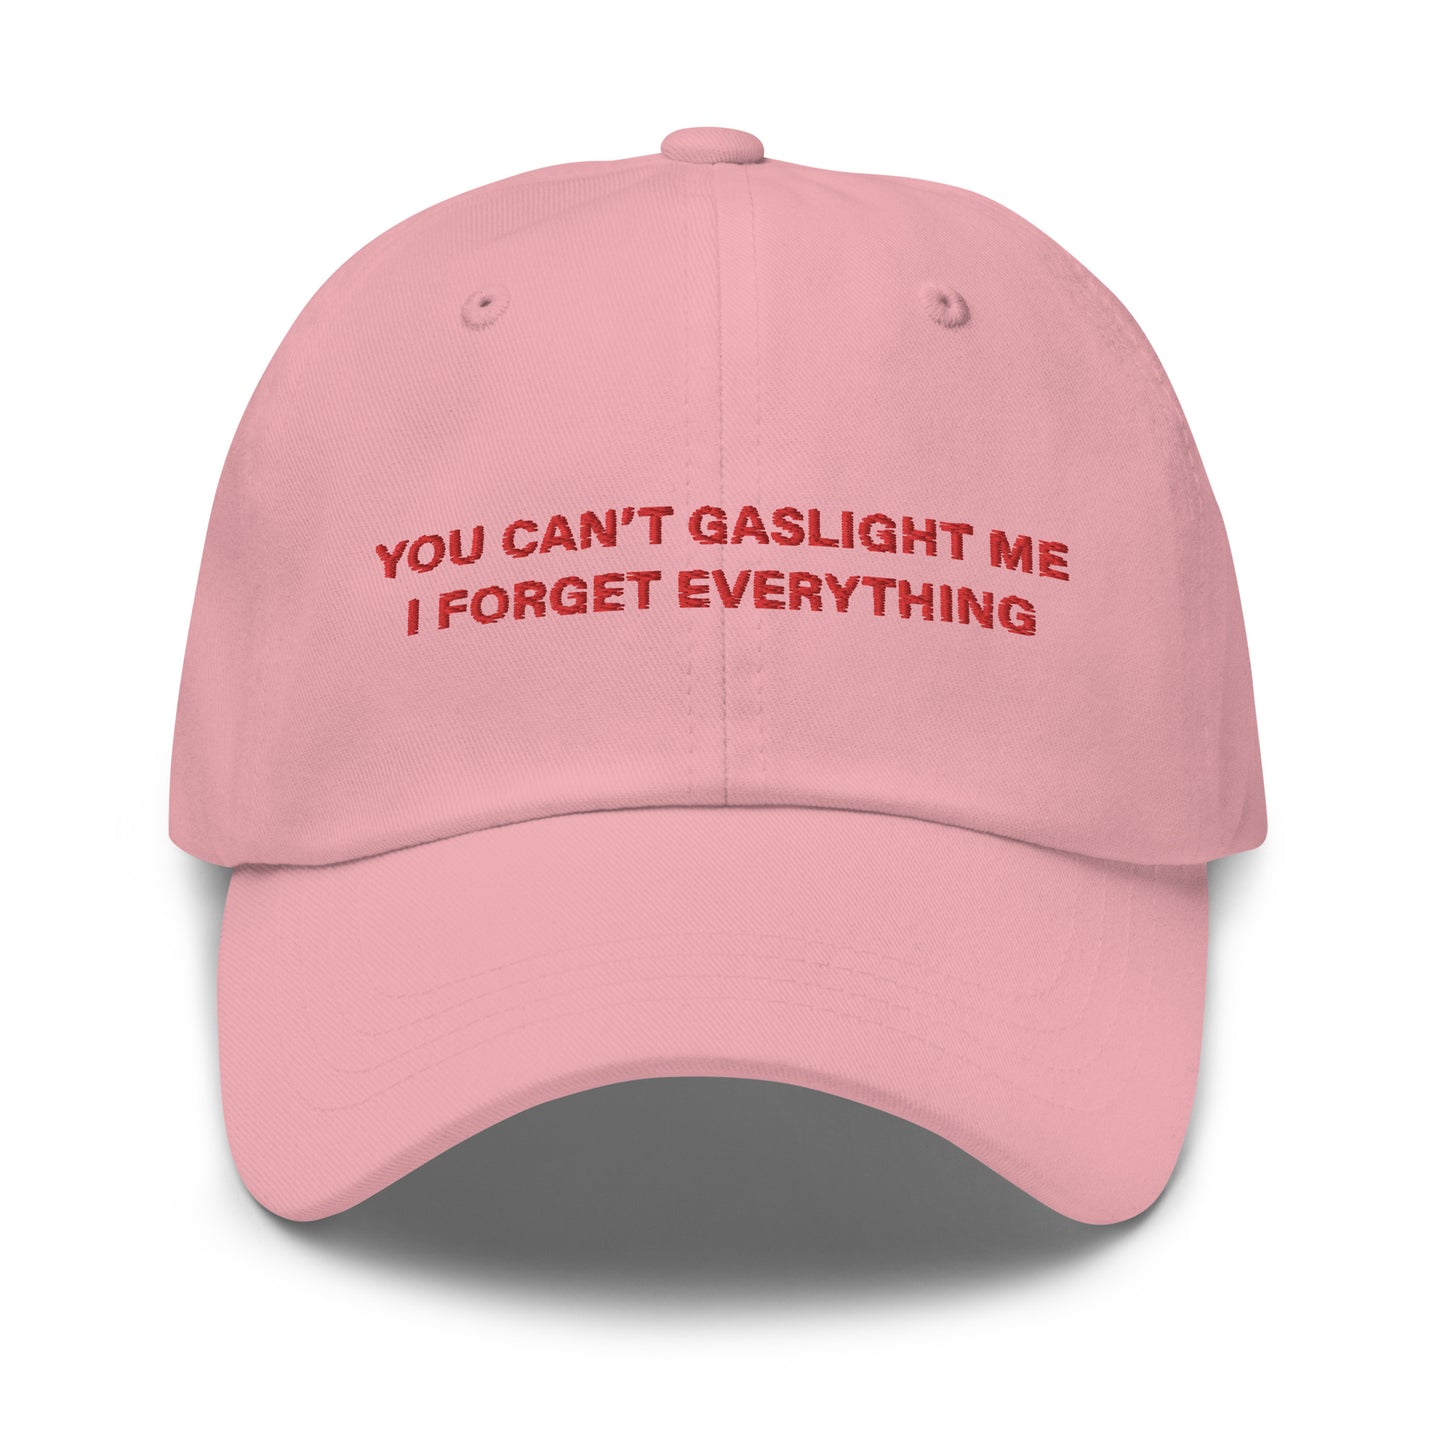 You Can't Gaslight Me hat